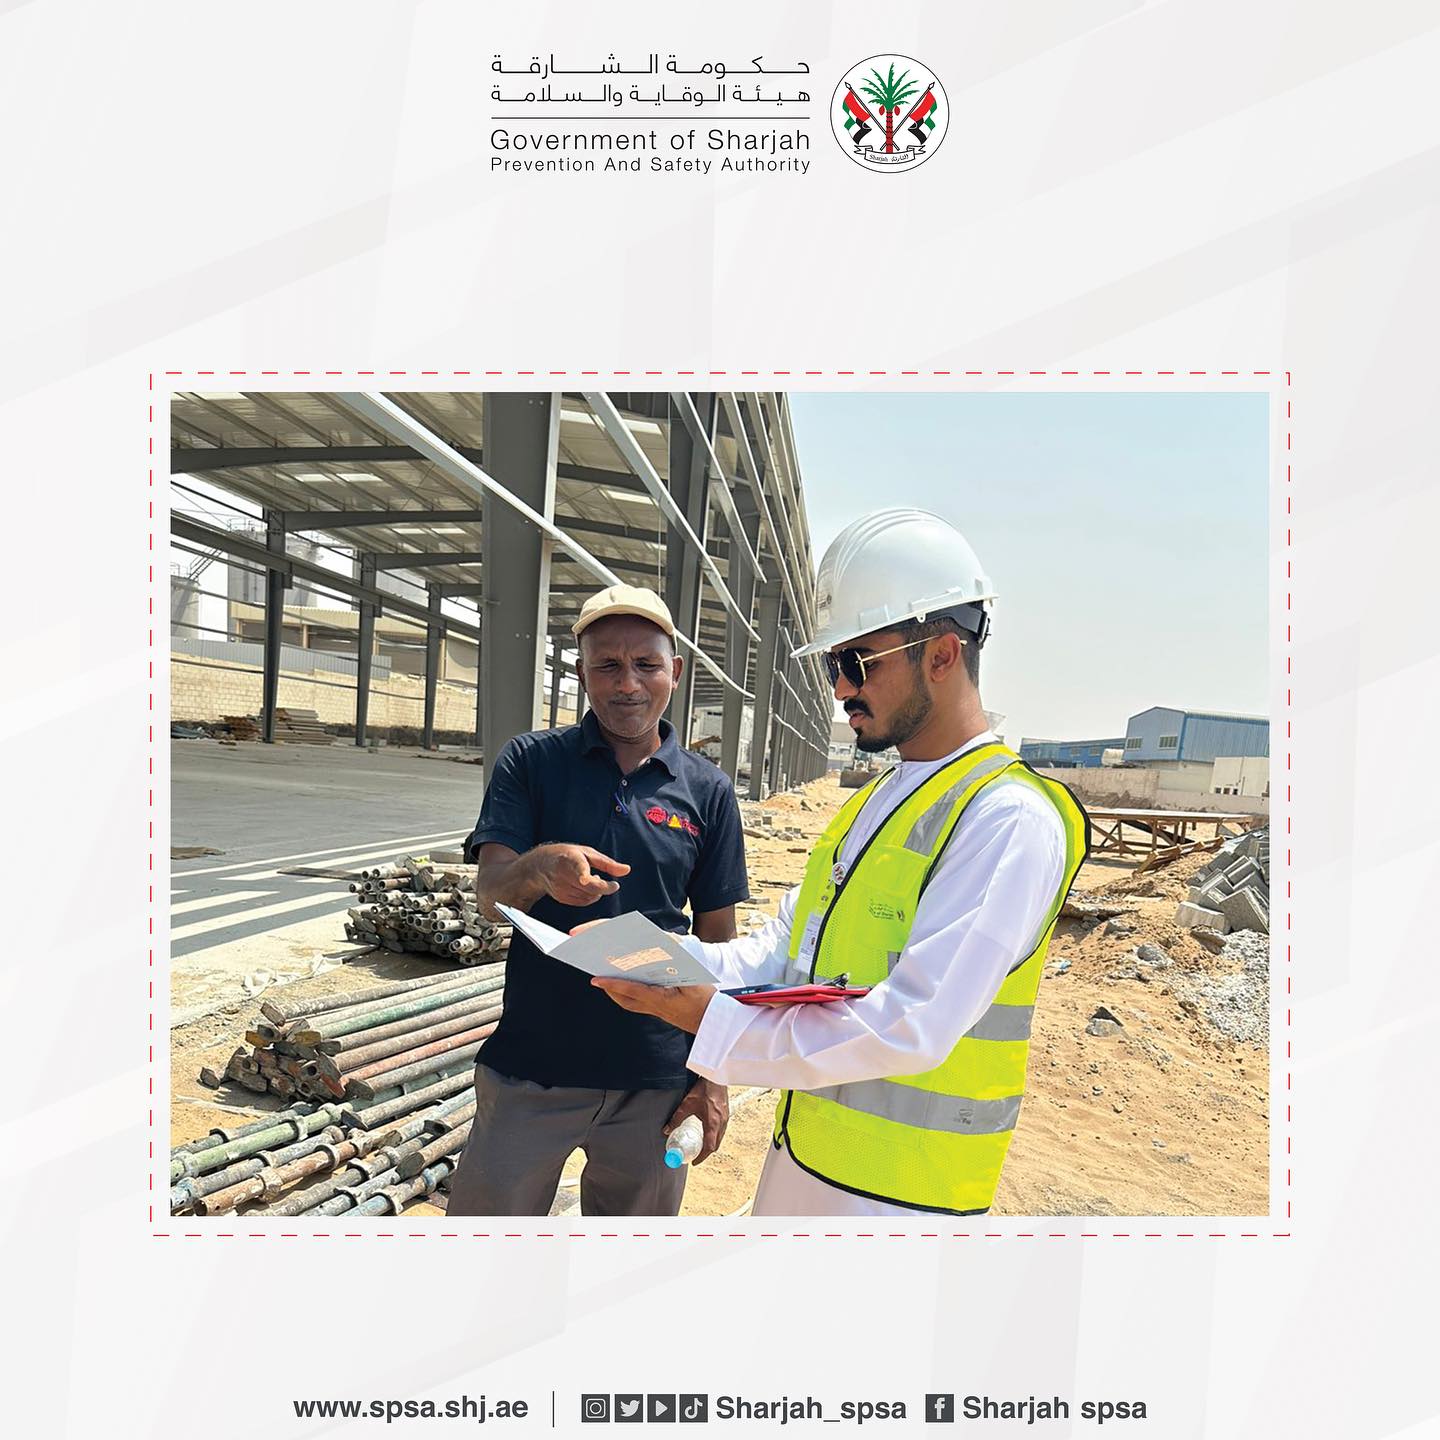 Inspection tours in the Emirate of Sharjah